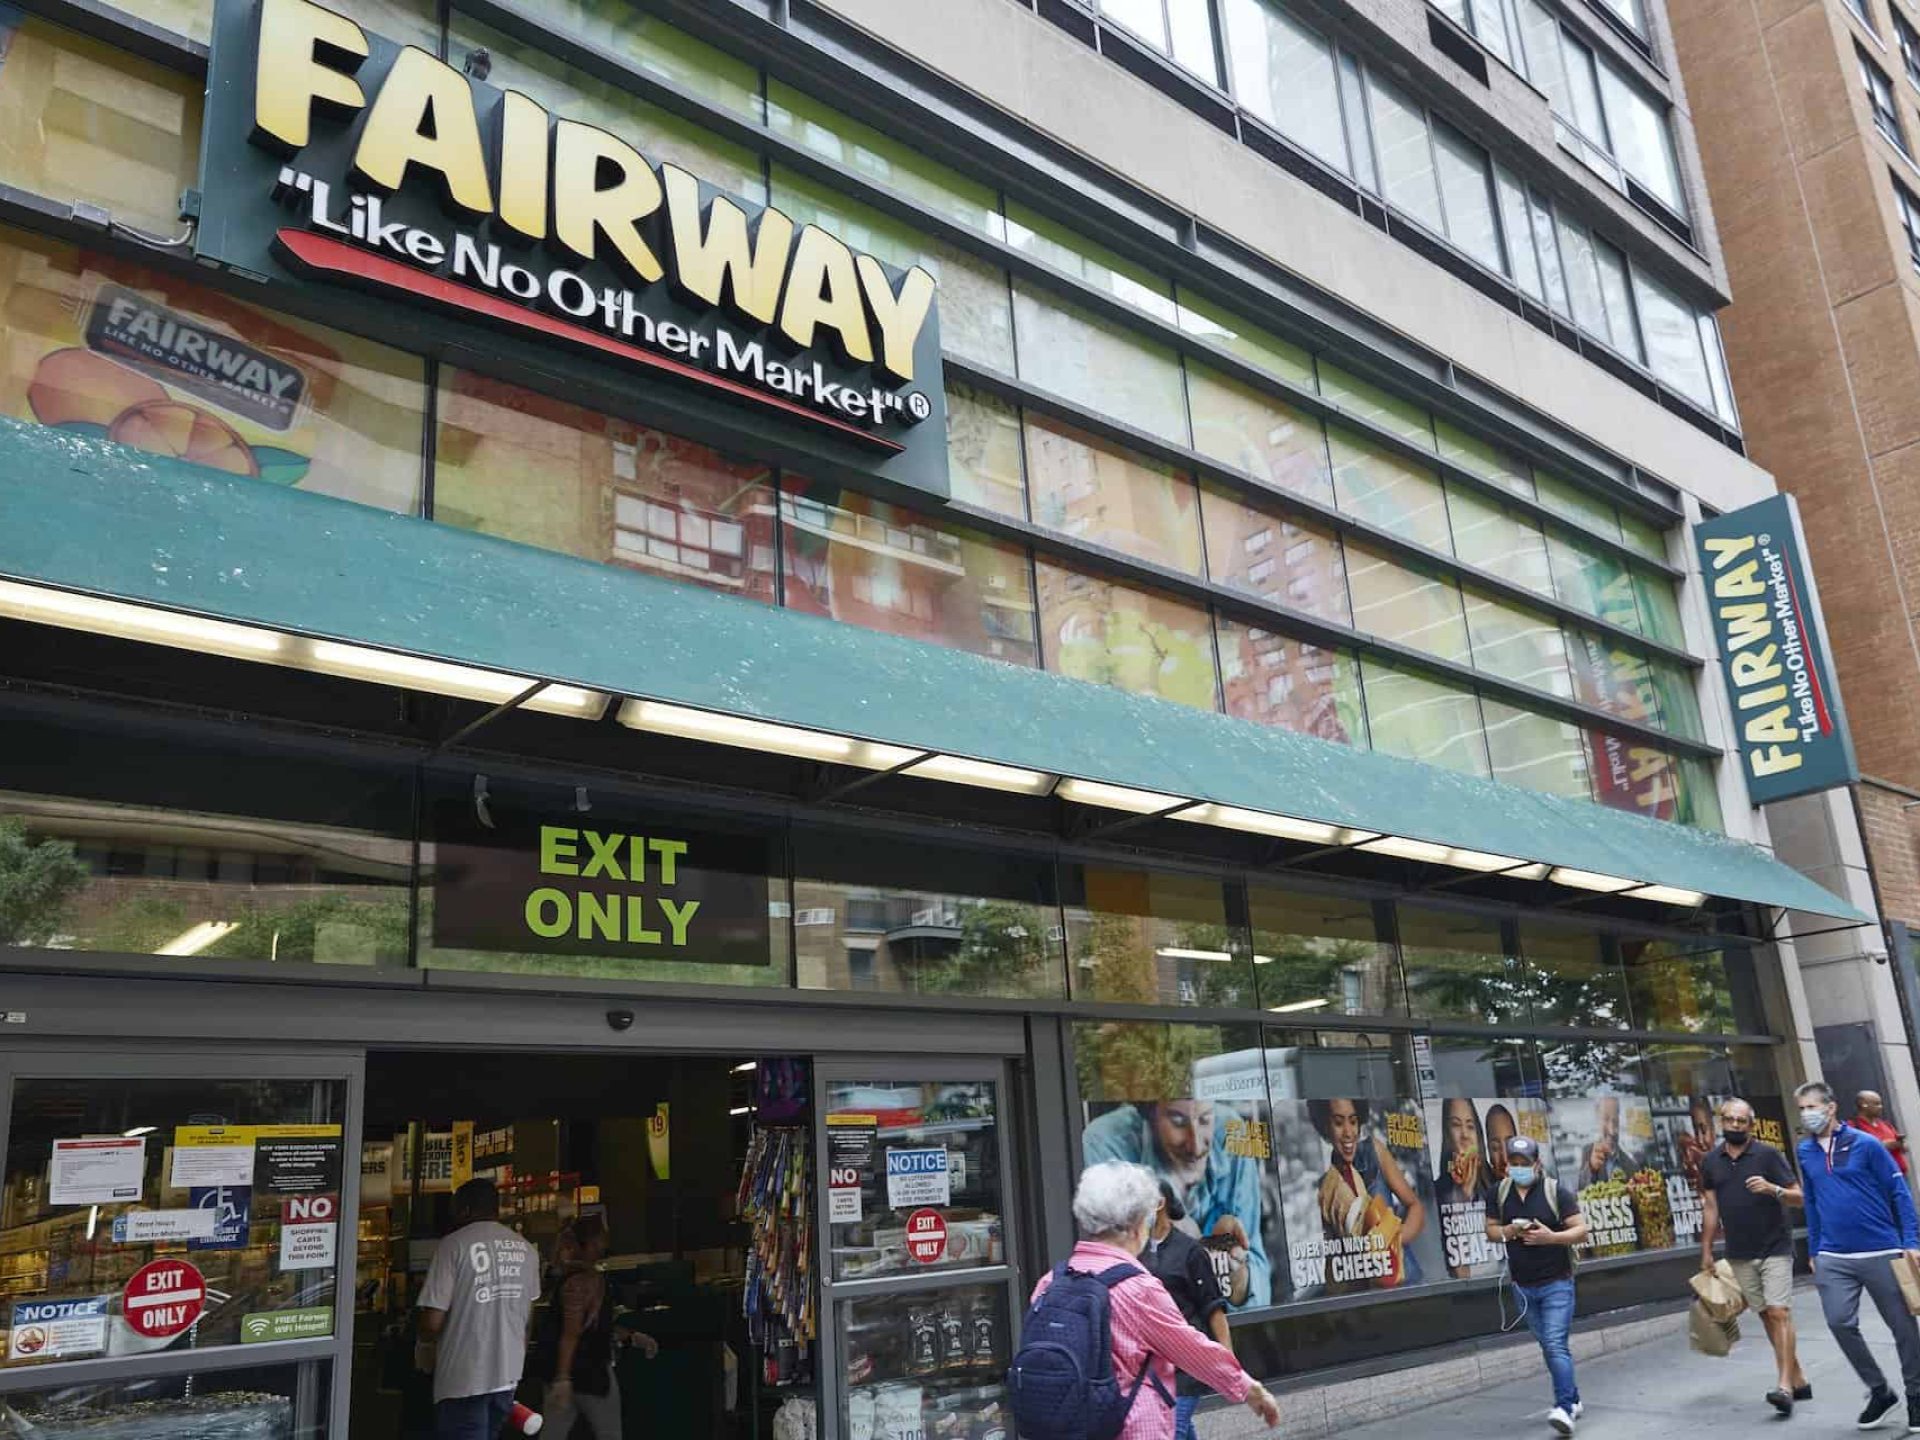 Entrance to Fairway Market with business signs, a green awning of the sidewalk, open double doors and people walking.